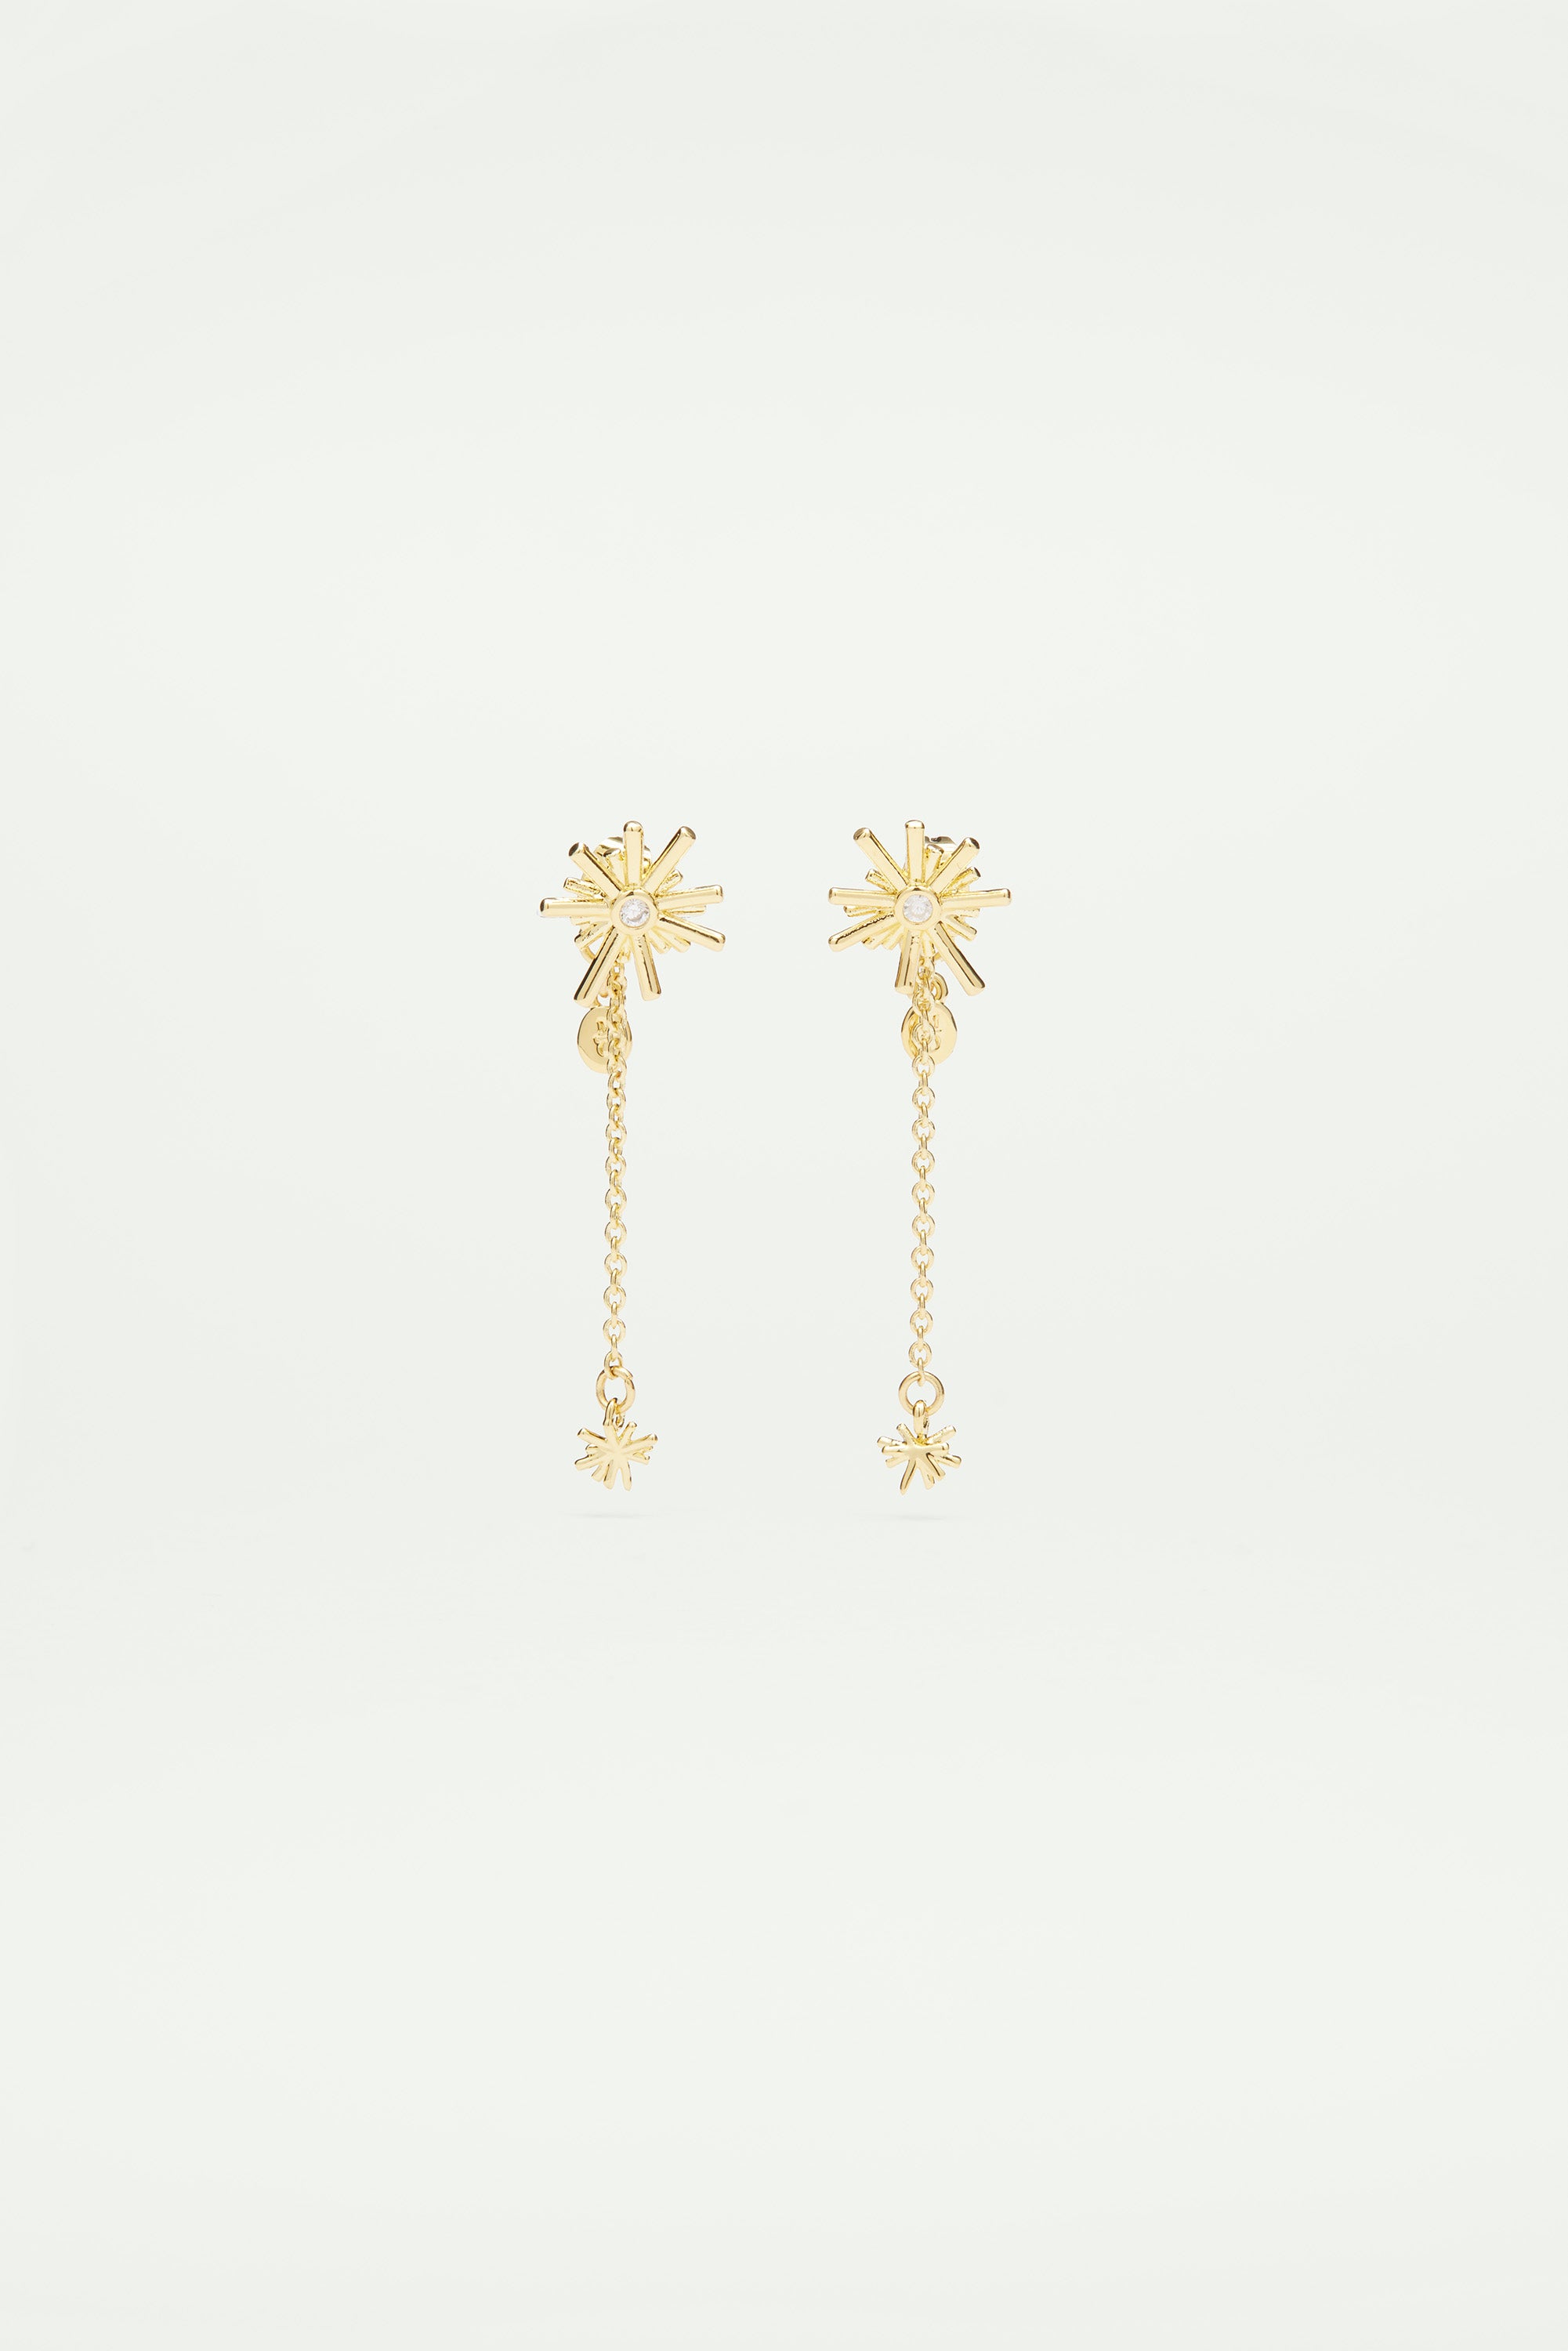 Gold stars and white stone dangling post earrings